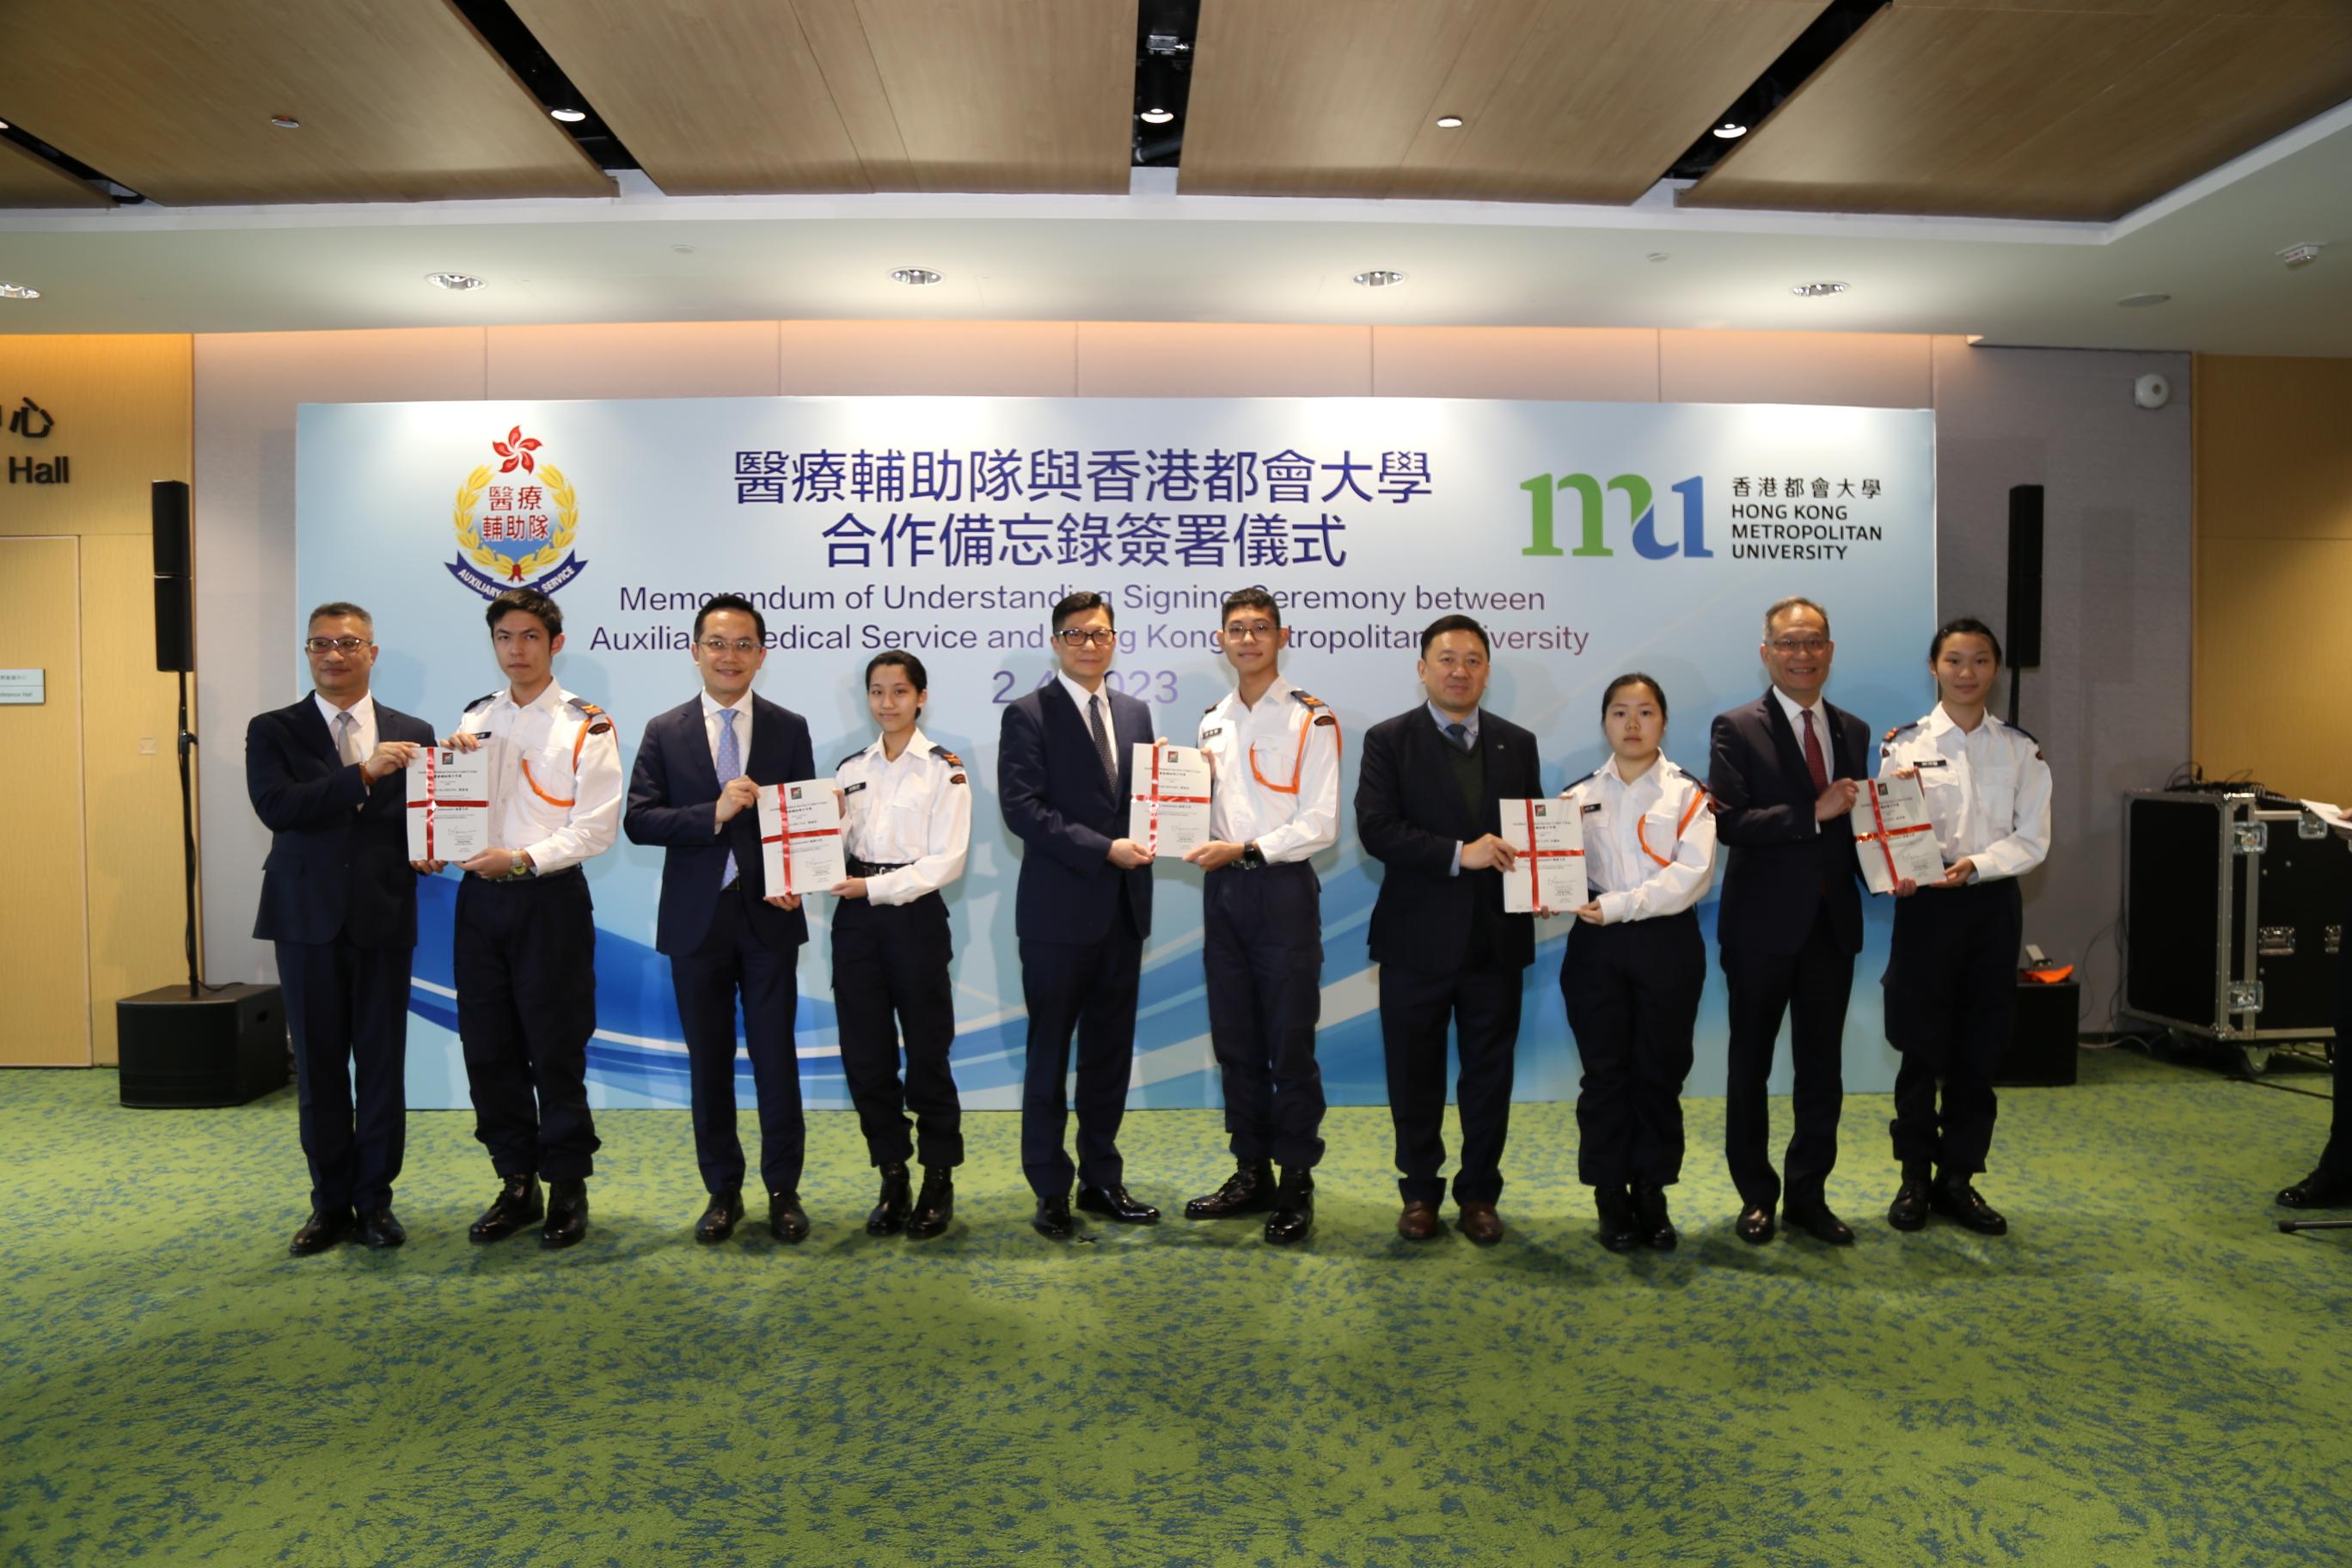 The Auxiliary Medical Service (AMS) and the Hong Kong Metropolitan University (HKMU) signed a Memorandum of Understanding (MoU) today (April 2) to officially launch a series of academic and service collaborations. On the same day, the Secretary for Security, Mr Tang Ping-keung, presented certificates to 266 Health Ambassadors of the AMS Cadet Corps. Mr Tang (fifth left); the Commissioner of the AMS, Dr Ronald Lam (third left); the Chief Staff Officer of the AMS, Mr Wong Ying-keung (first left); the Council Chairman of the HKMU, Dr Conrad Wong (fourth right); and the President of the HKMU, Professor Paul Lam (second right), took a photo with the five cadet representatives.